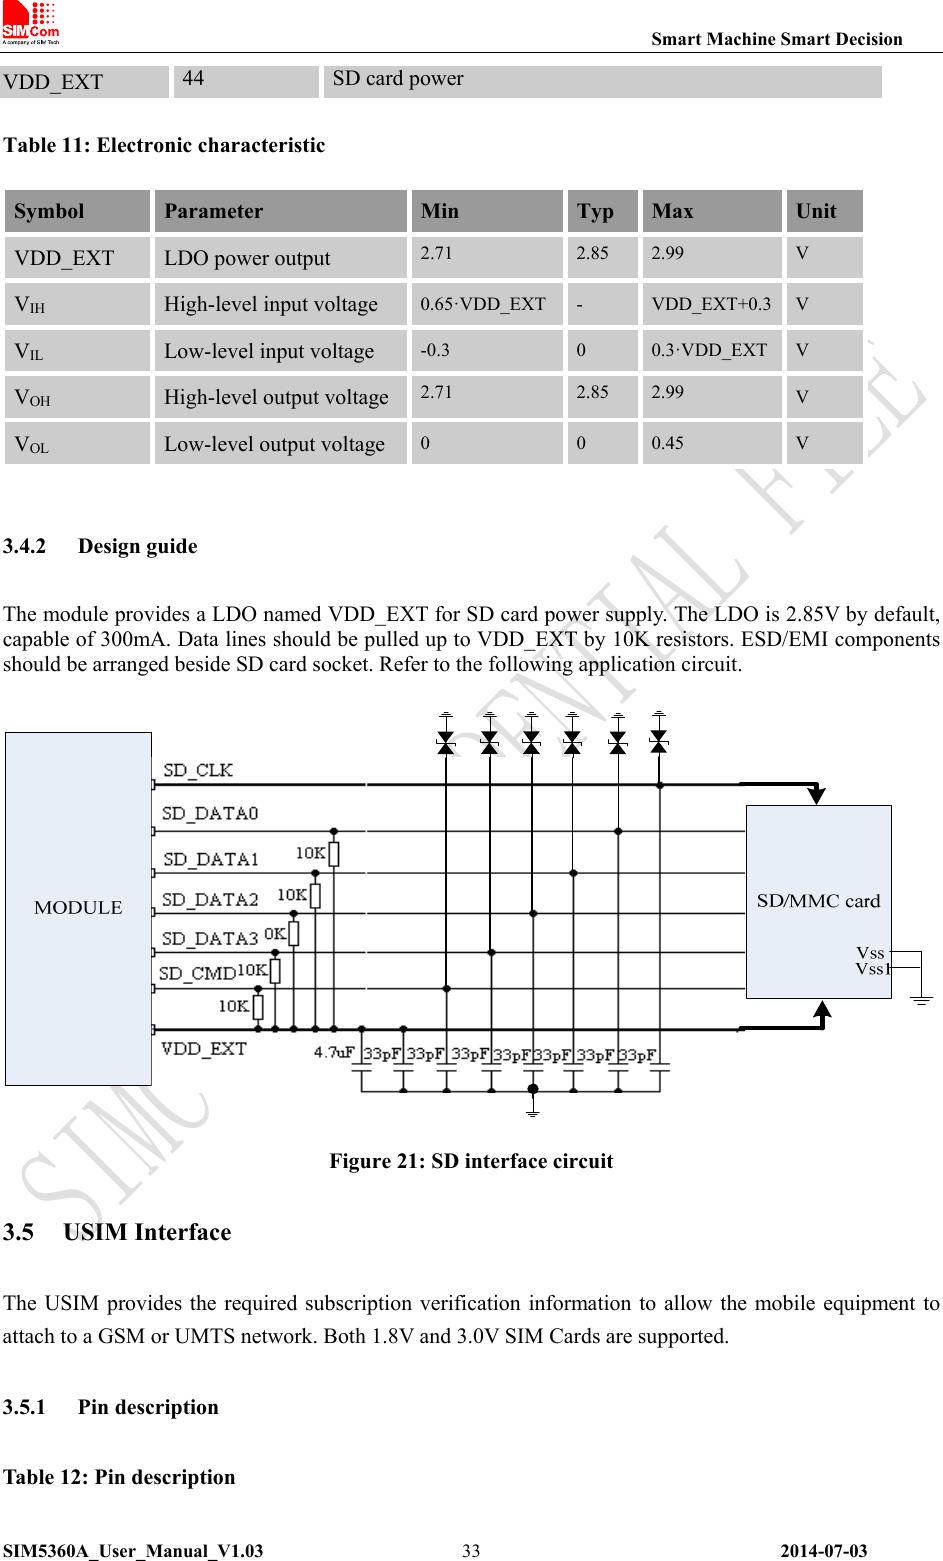                                                                Smart Machine Smart Decision SIM5360A_User_Manual_V1.03                 2014-07-03 33Table 11: Electronic characteristic Symbol  Parameter  Min  Typ  Max  Unit VDD_EXT  LDO power output  2.71  2.85  2.99  V VIH High-level input voltage  0.65·VDD_EXT -  VDD_EXT+0.3  V VIL Low-level input voltage  -0.3  0  0.3·VDD_EXT  V VOH High-level output voltage 2.71  2.85  2.99  V VOL Low-level output voltage  0  0  0.45  V  3.4.2 Design guide The module provides a LDO named VDD_EXT for SD card power supply. The LDO is 2.85V by default, capable of 300mA. Data lines should be pulled up to VDD_EXT by 10K resistors. ESD/EMI components should be arranged beside SD card socket. Refer to the following application circuit.   Figure 21: SD interface circuit 3.5 USIM Interface The USIM  provides the required subscription  verification information to allow the mobile equipment to attach to a GSM or UMTS network. Both 1.8V and 3.0V SIM Cards are supported. 3.5.1 Pin description Table 12: Pin description VDD_EXT  44  SD card power 